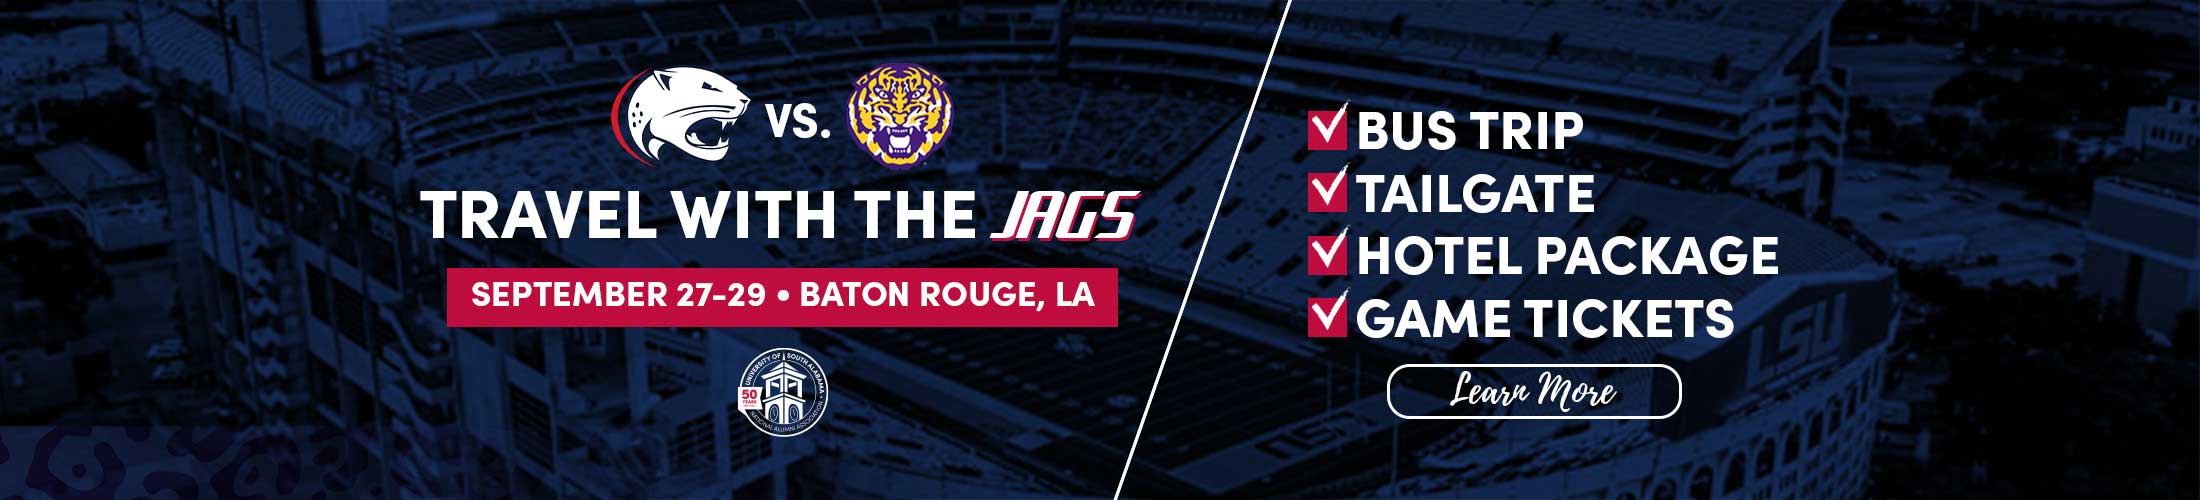 Travel with the JAGS September 27-29 Baton Rouge, LA Bus Trip, Tailgate, Hotel Package, Game Tickets